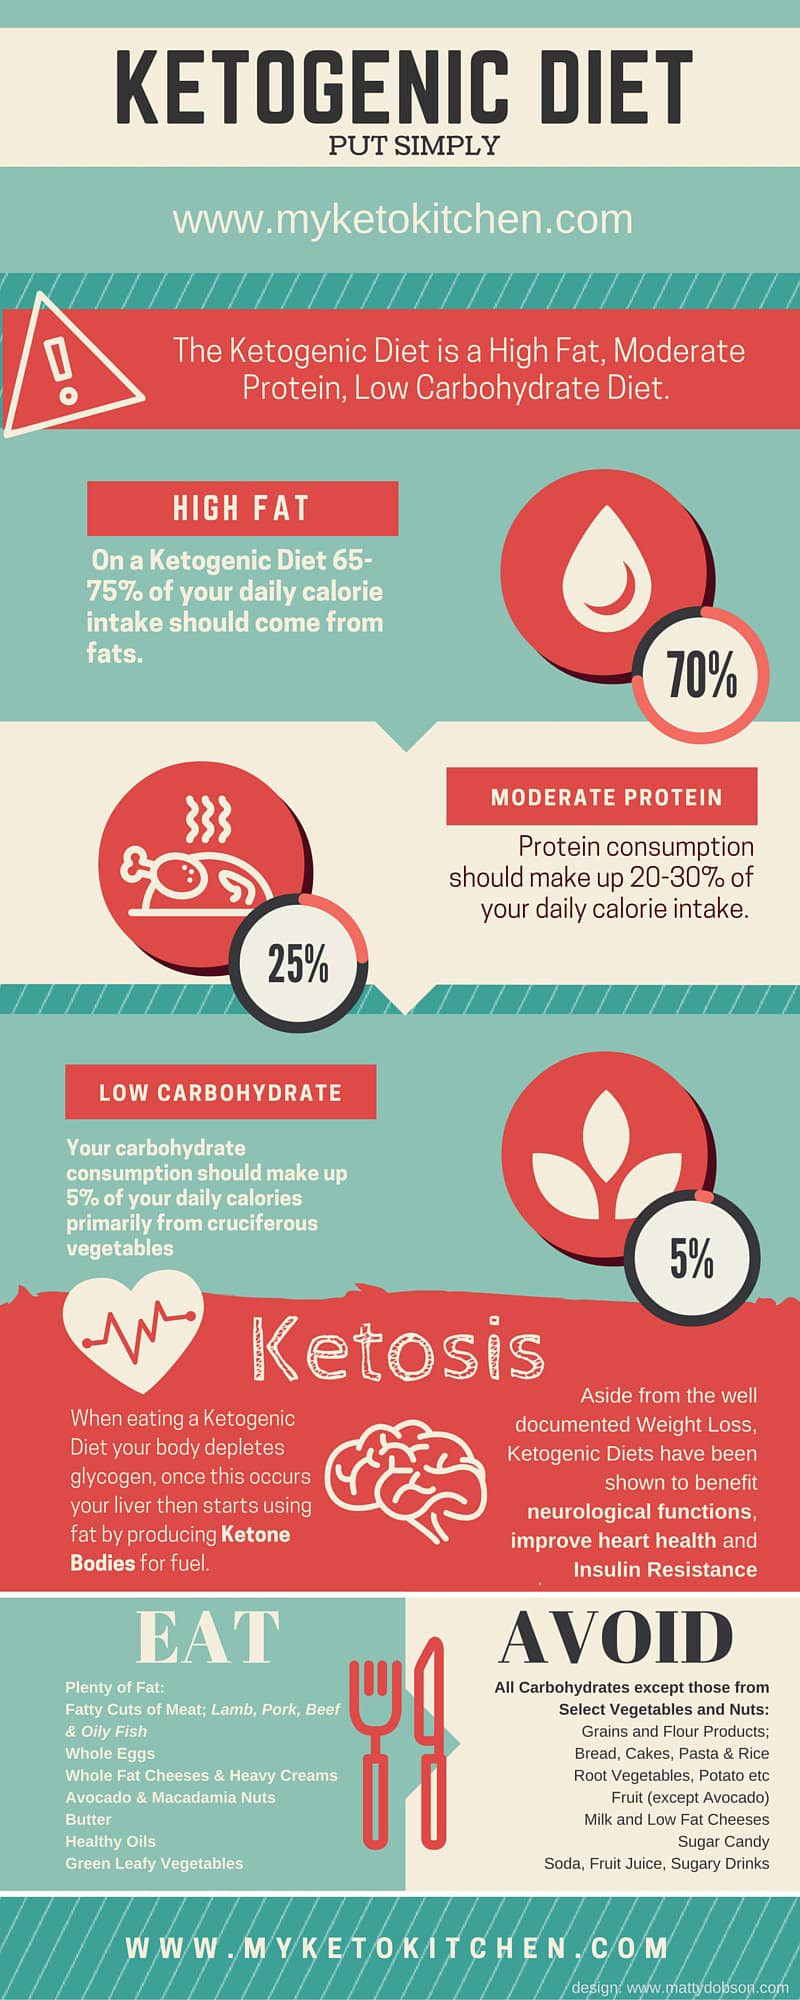 Keto Diet Protein
 How Much Protein A Keto Diet Is Too Much Bad for Ketosis